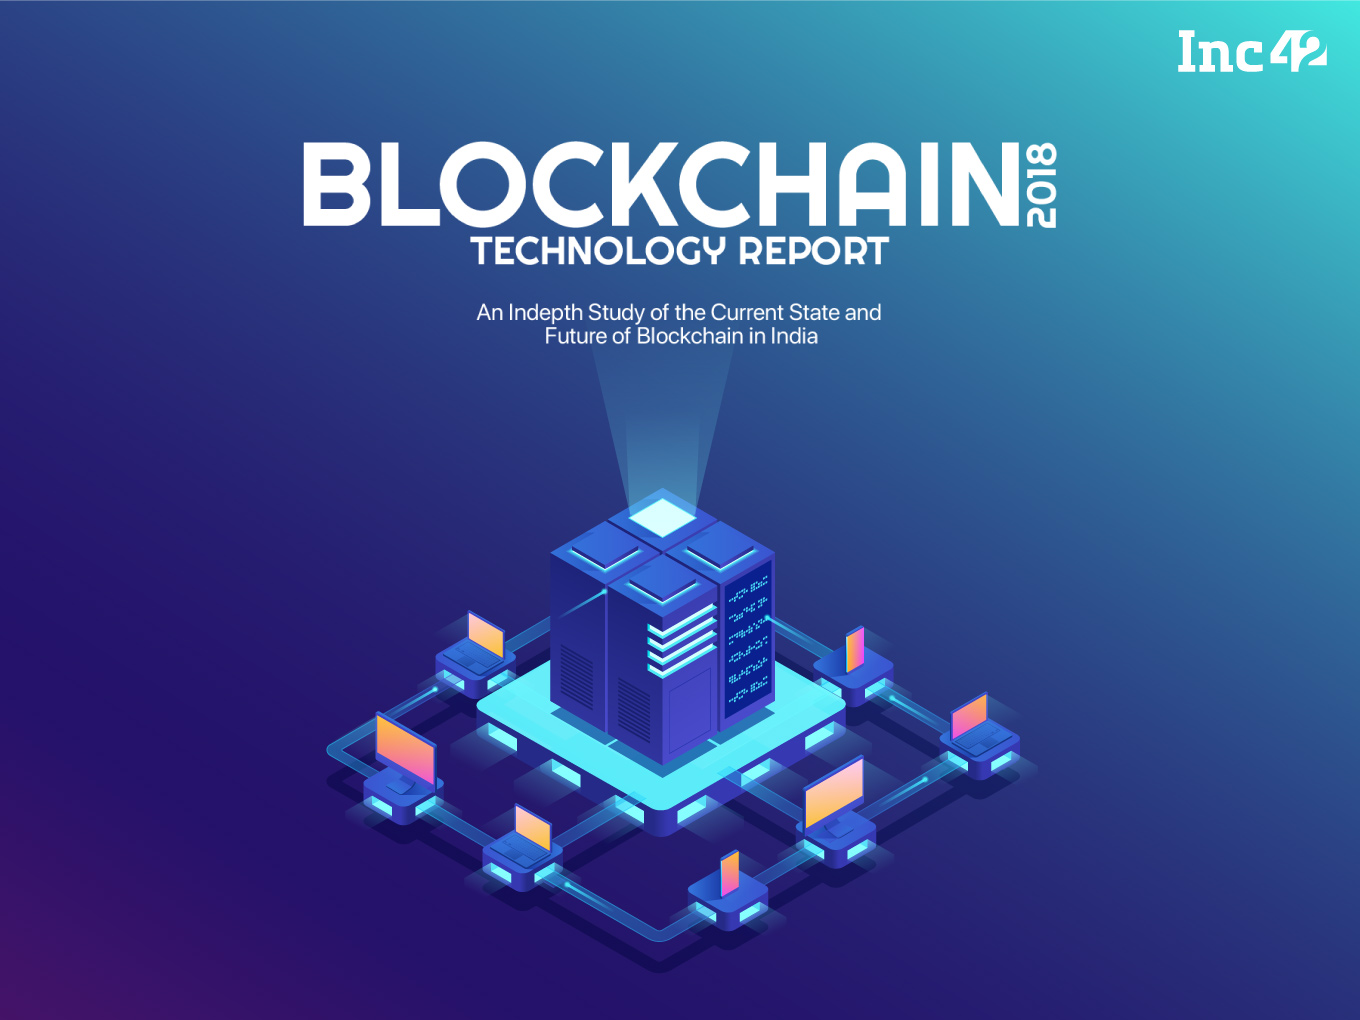 Coming Up: Inc42 Blockchain Technology Report 2018 To Decode The Hottest Technology For Both Pros And Noobs